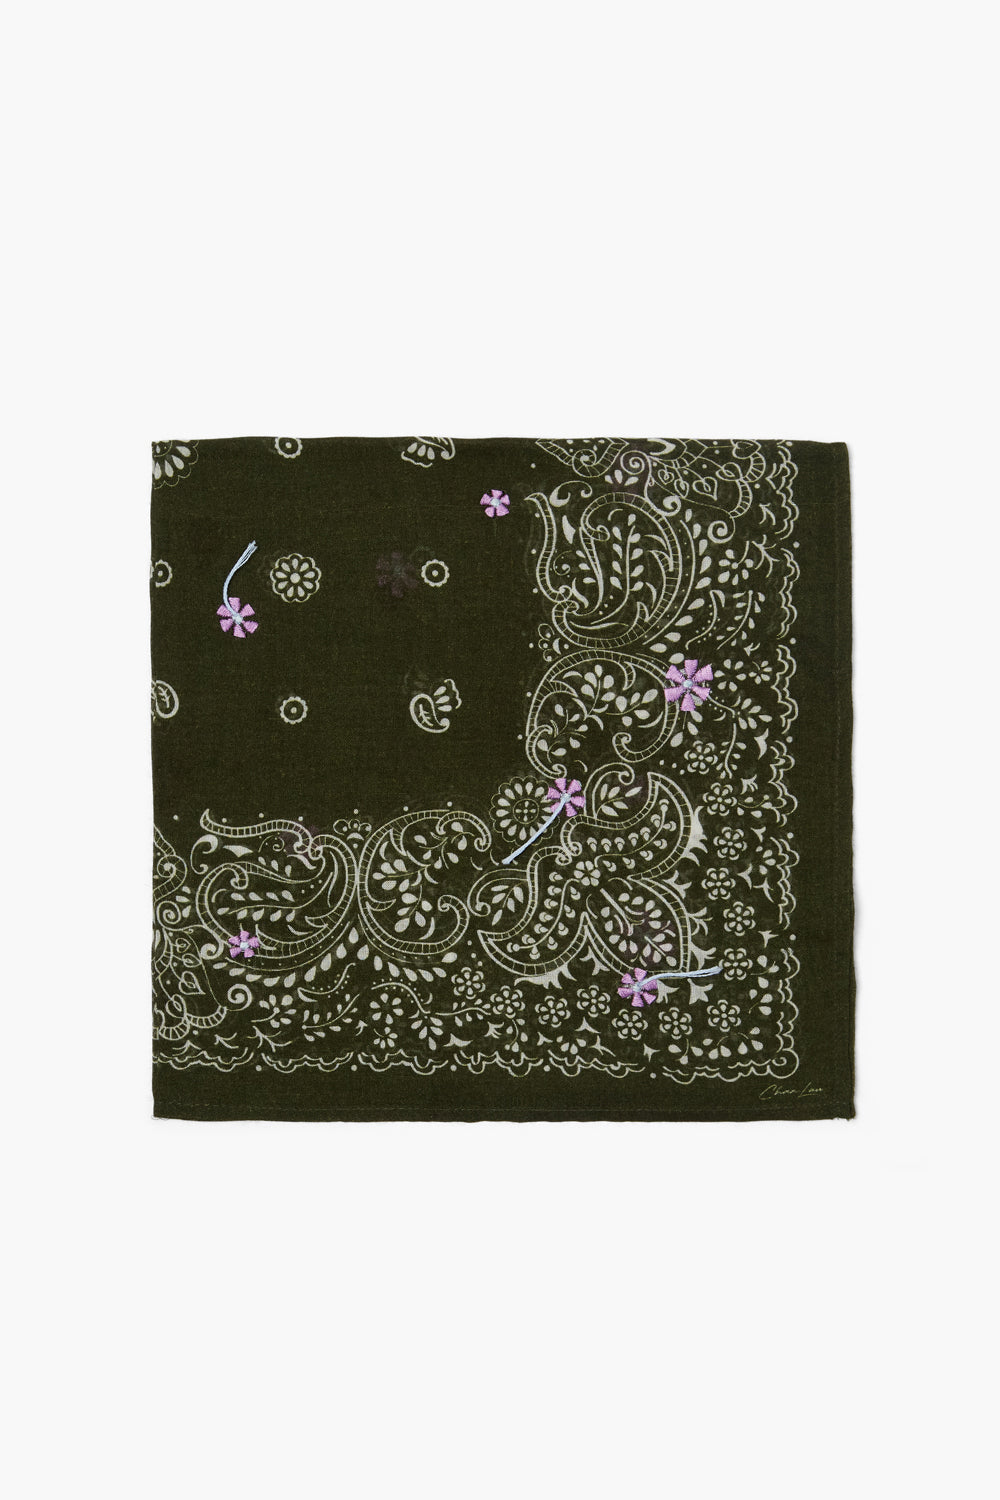 EMBROIDERED FLORAL BANDANA-RIFLE GREEN - Kingfisher Road - Online Boutique